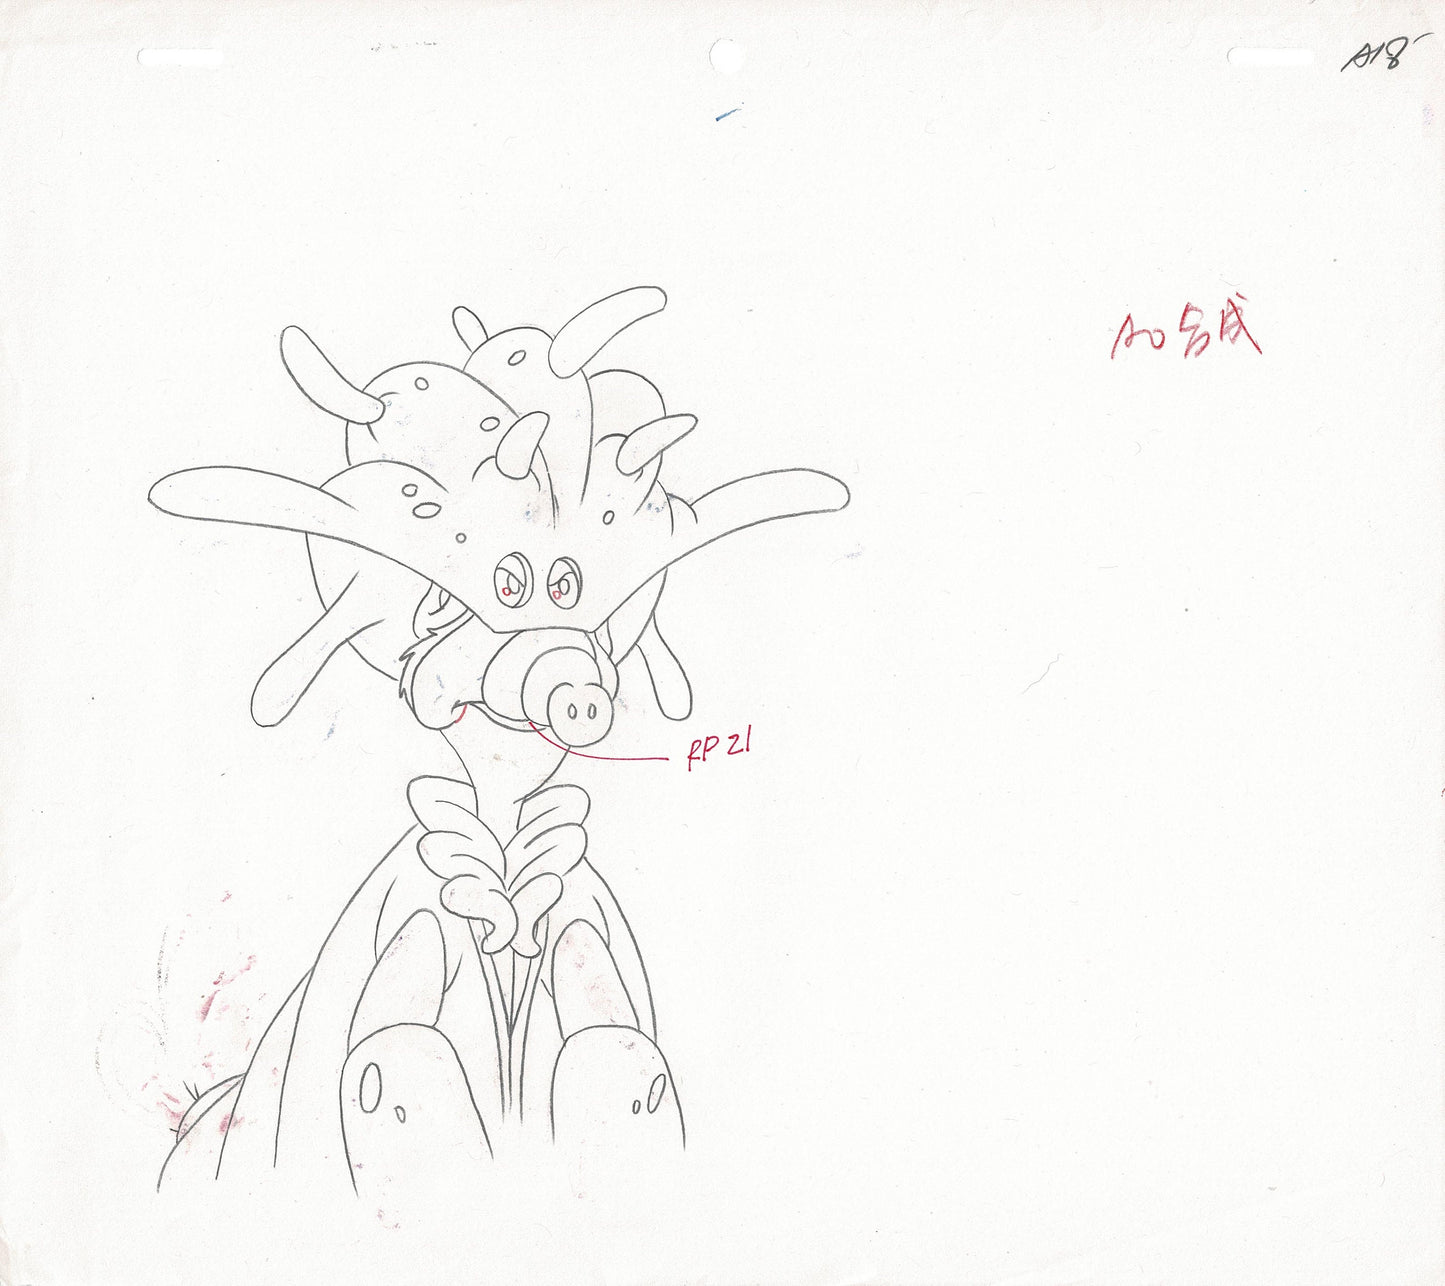 ALF The Animated Series Production Animation Cel and Drawing DIC Melmac b18